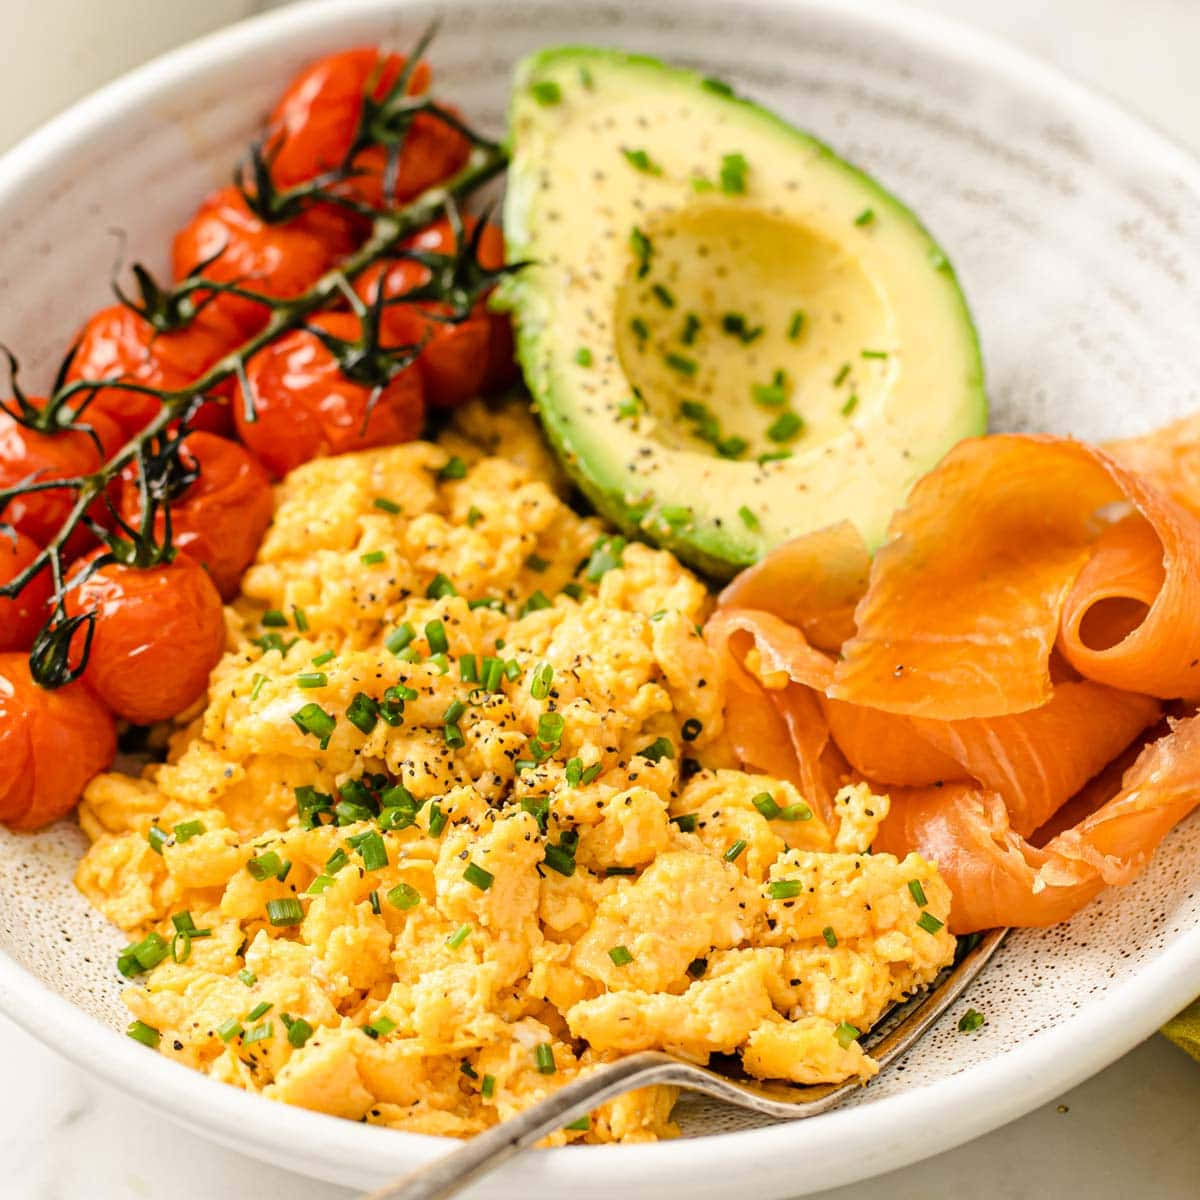 A Delicious Plate Of Scrambled Eggs